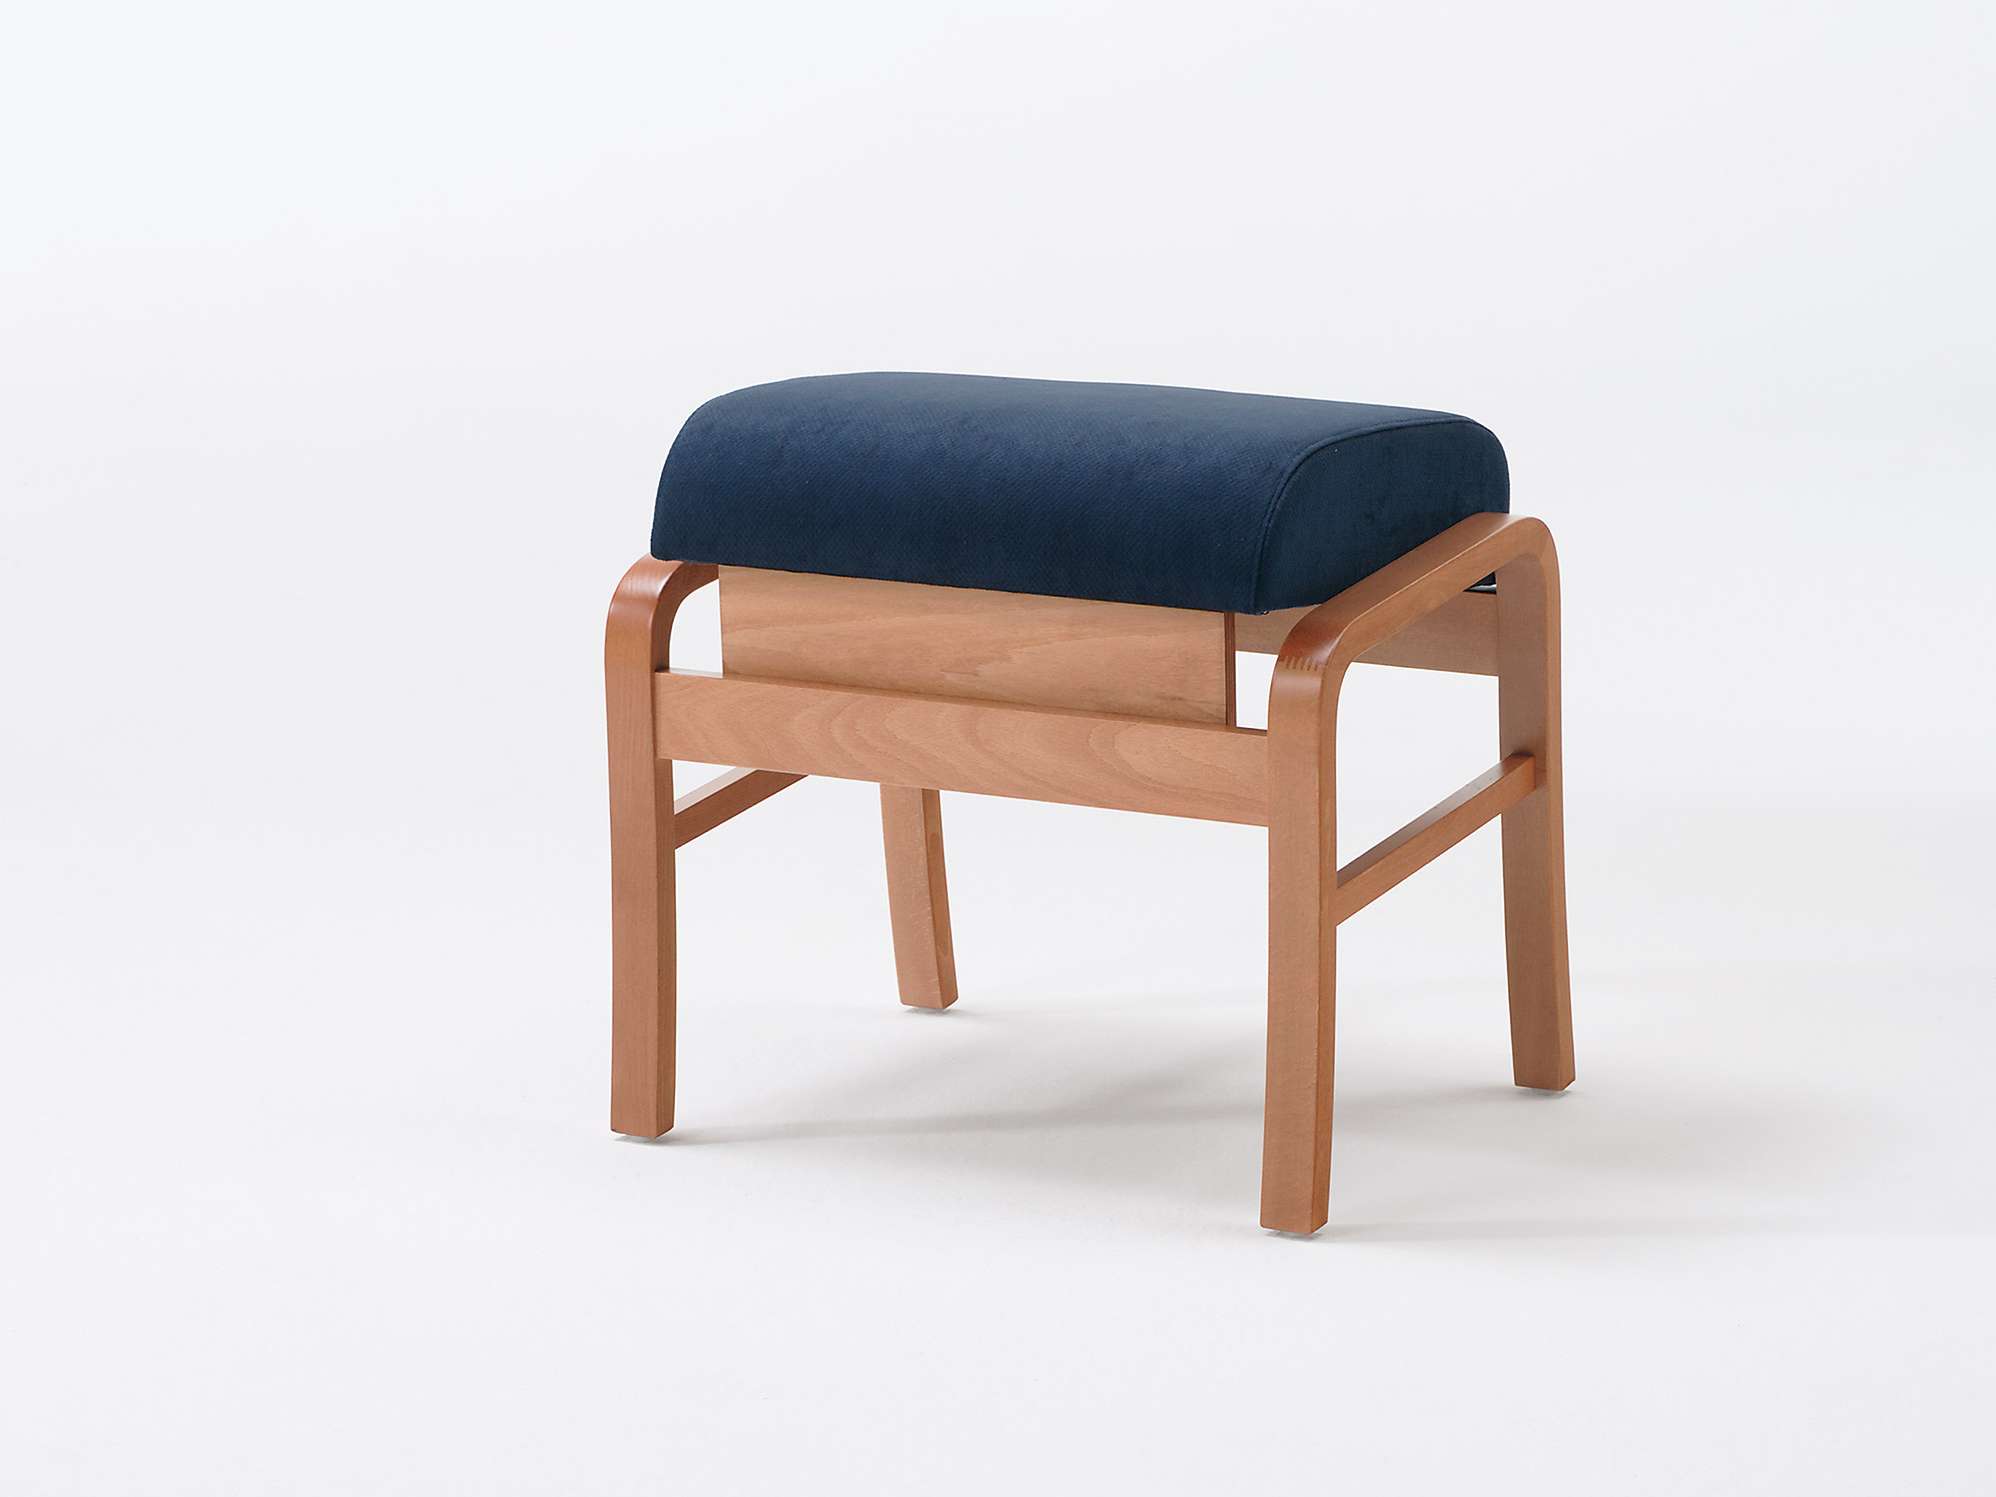 Footstools from the Sedego range of chairs